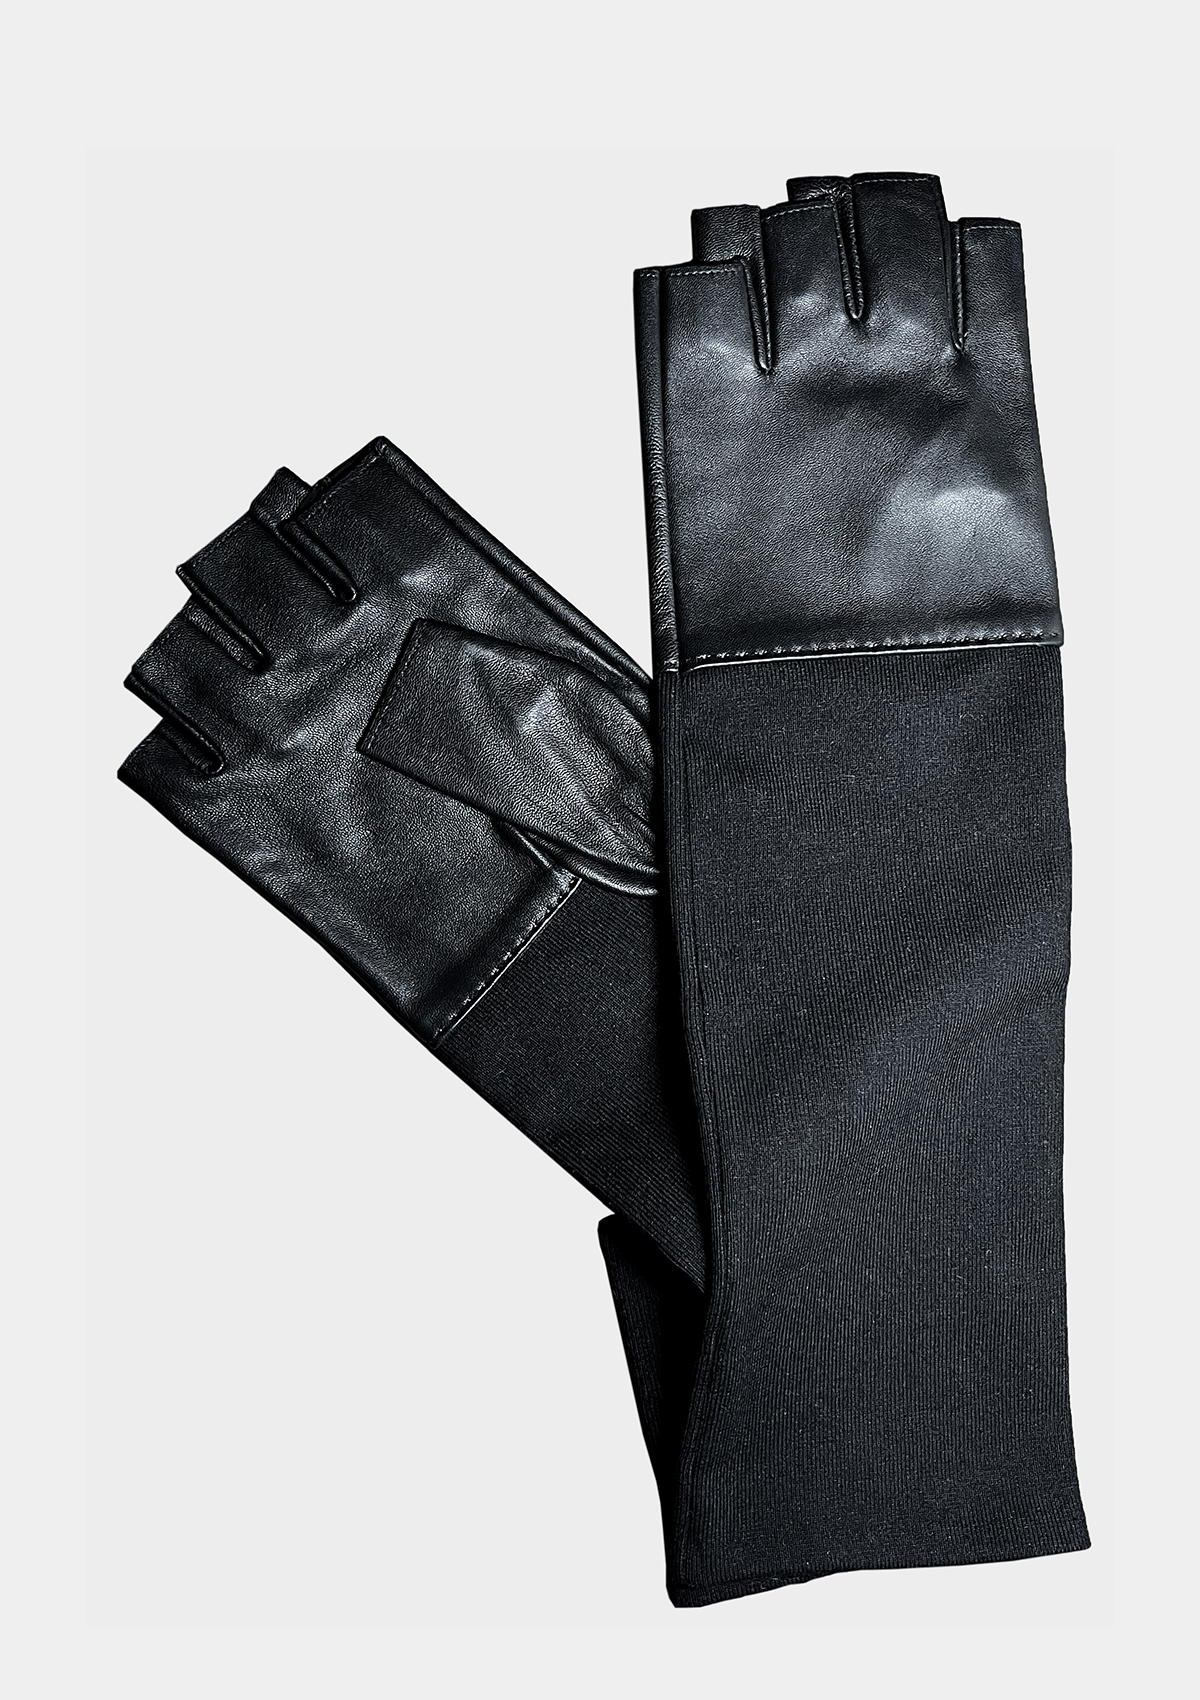 FINGERLESS LEATHER AND KNIT GLOVES